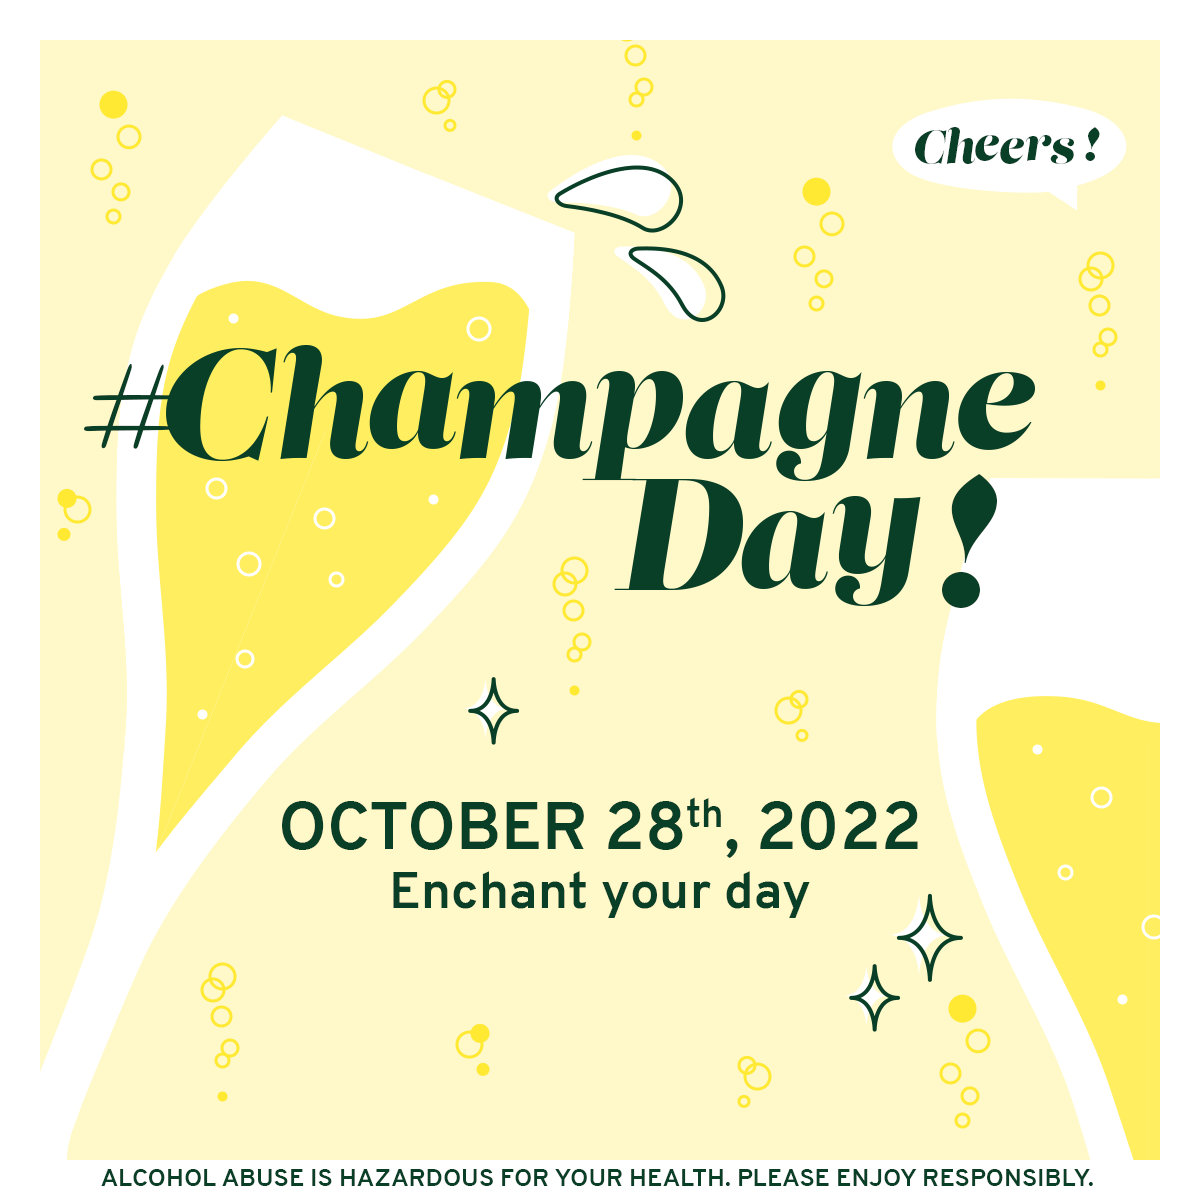 Save The Date: Champagne Day 2022 is October 28